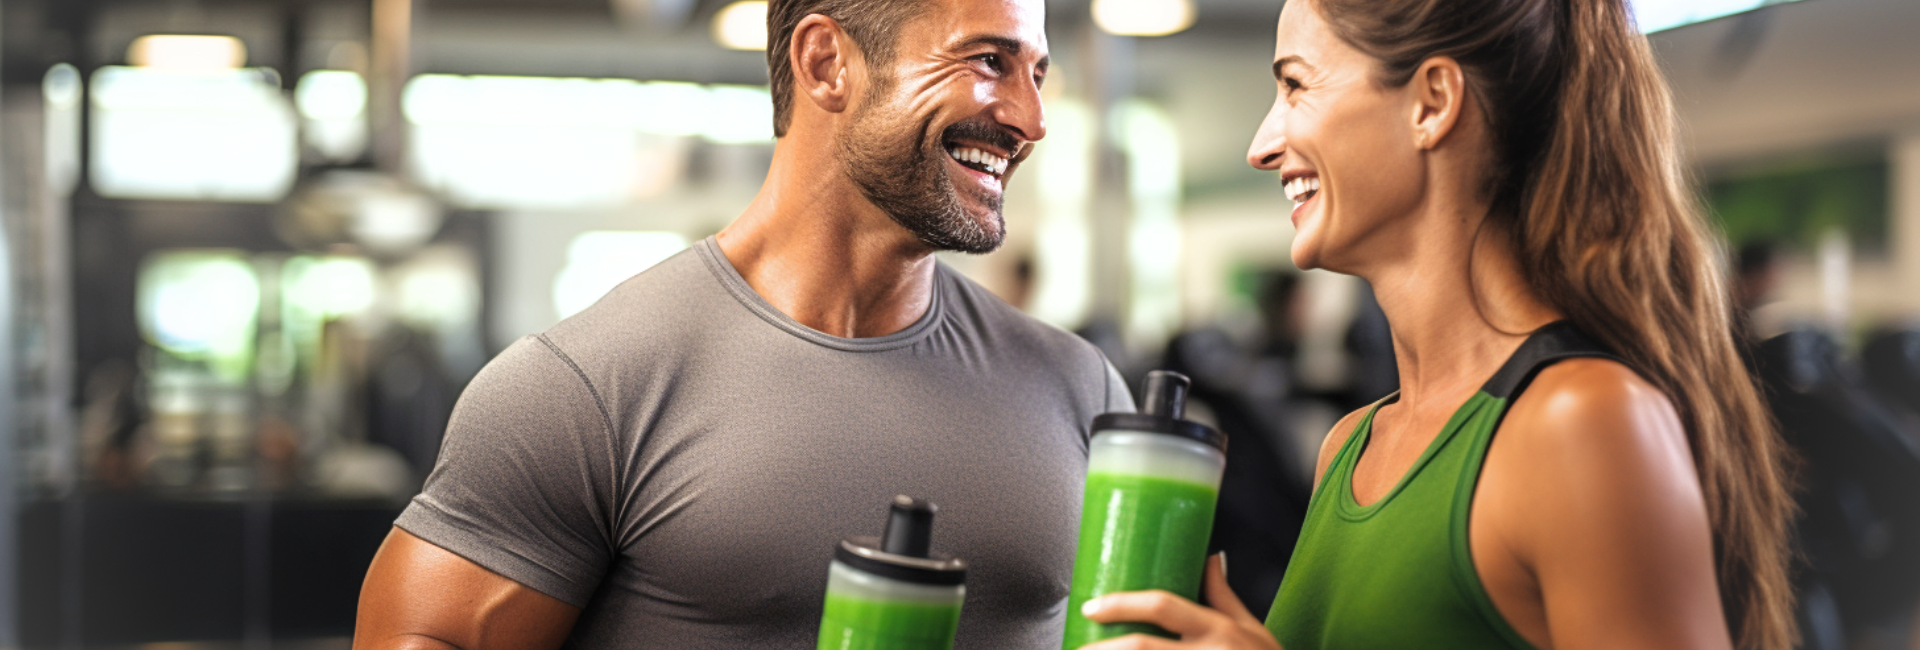 A fit and attractive couple enjoying a nutritious green smoothie together at the gym.